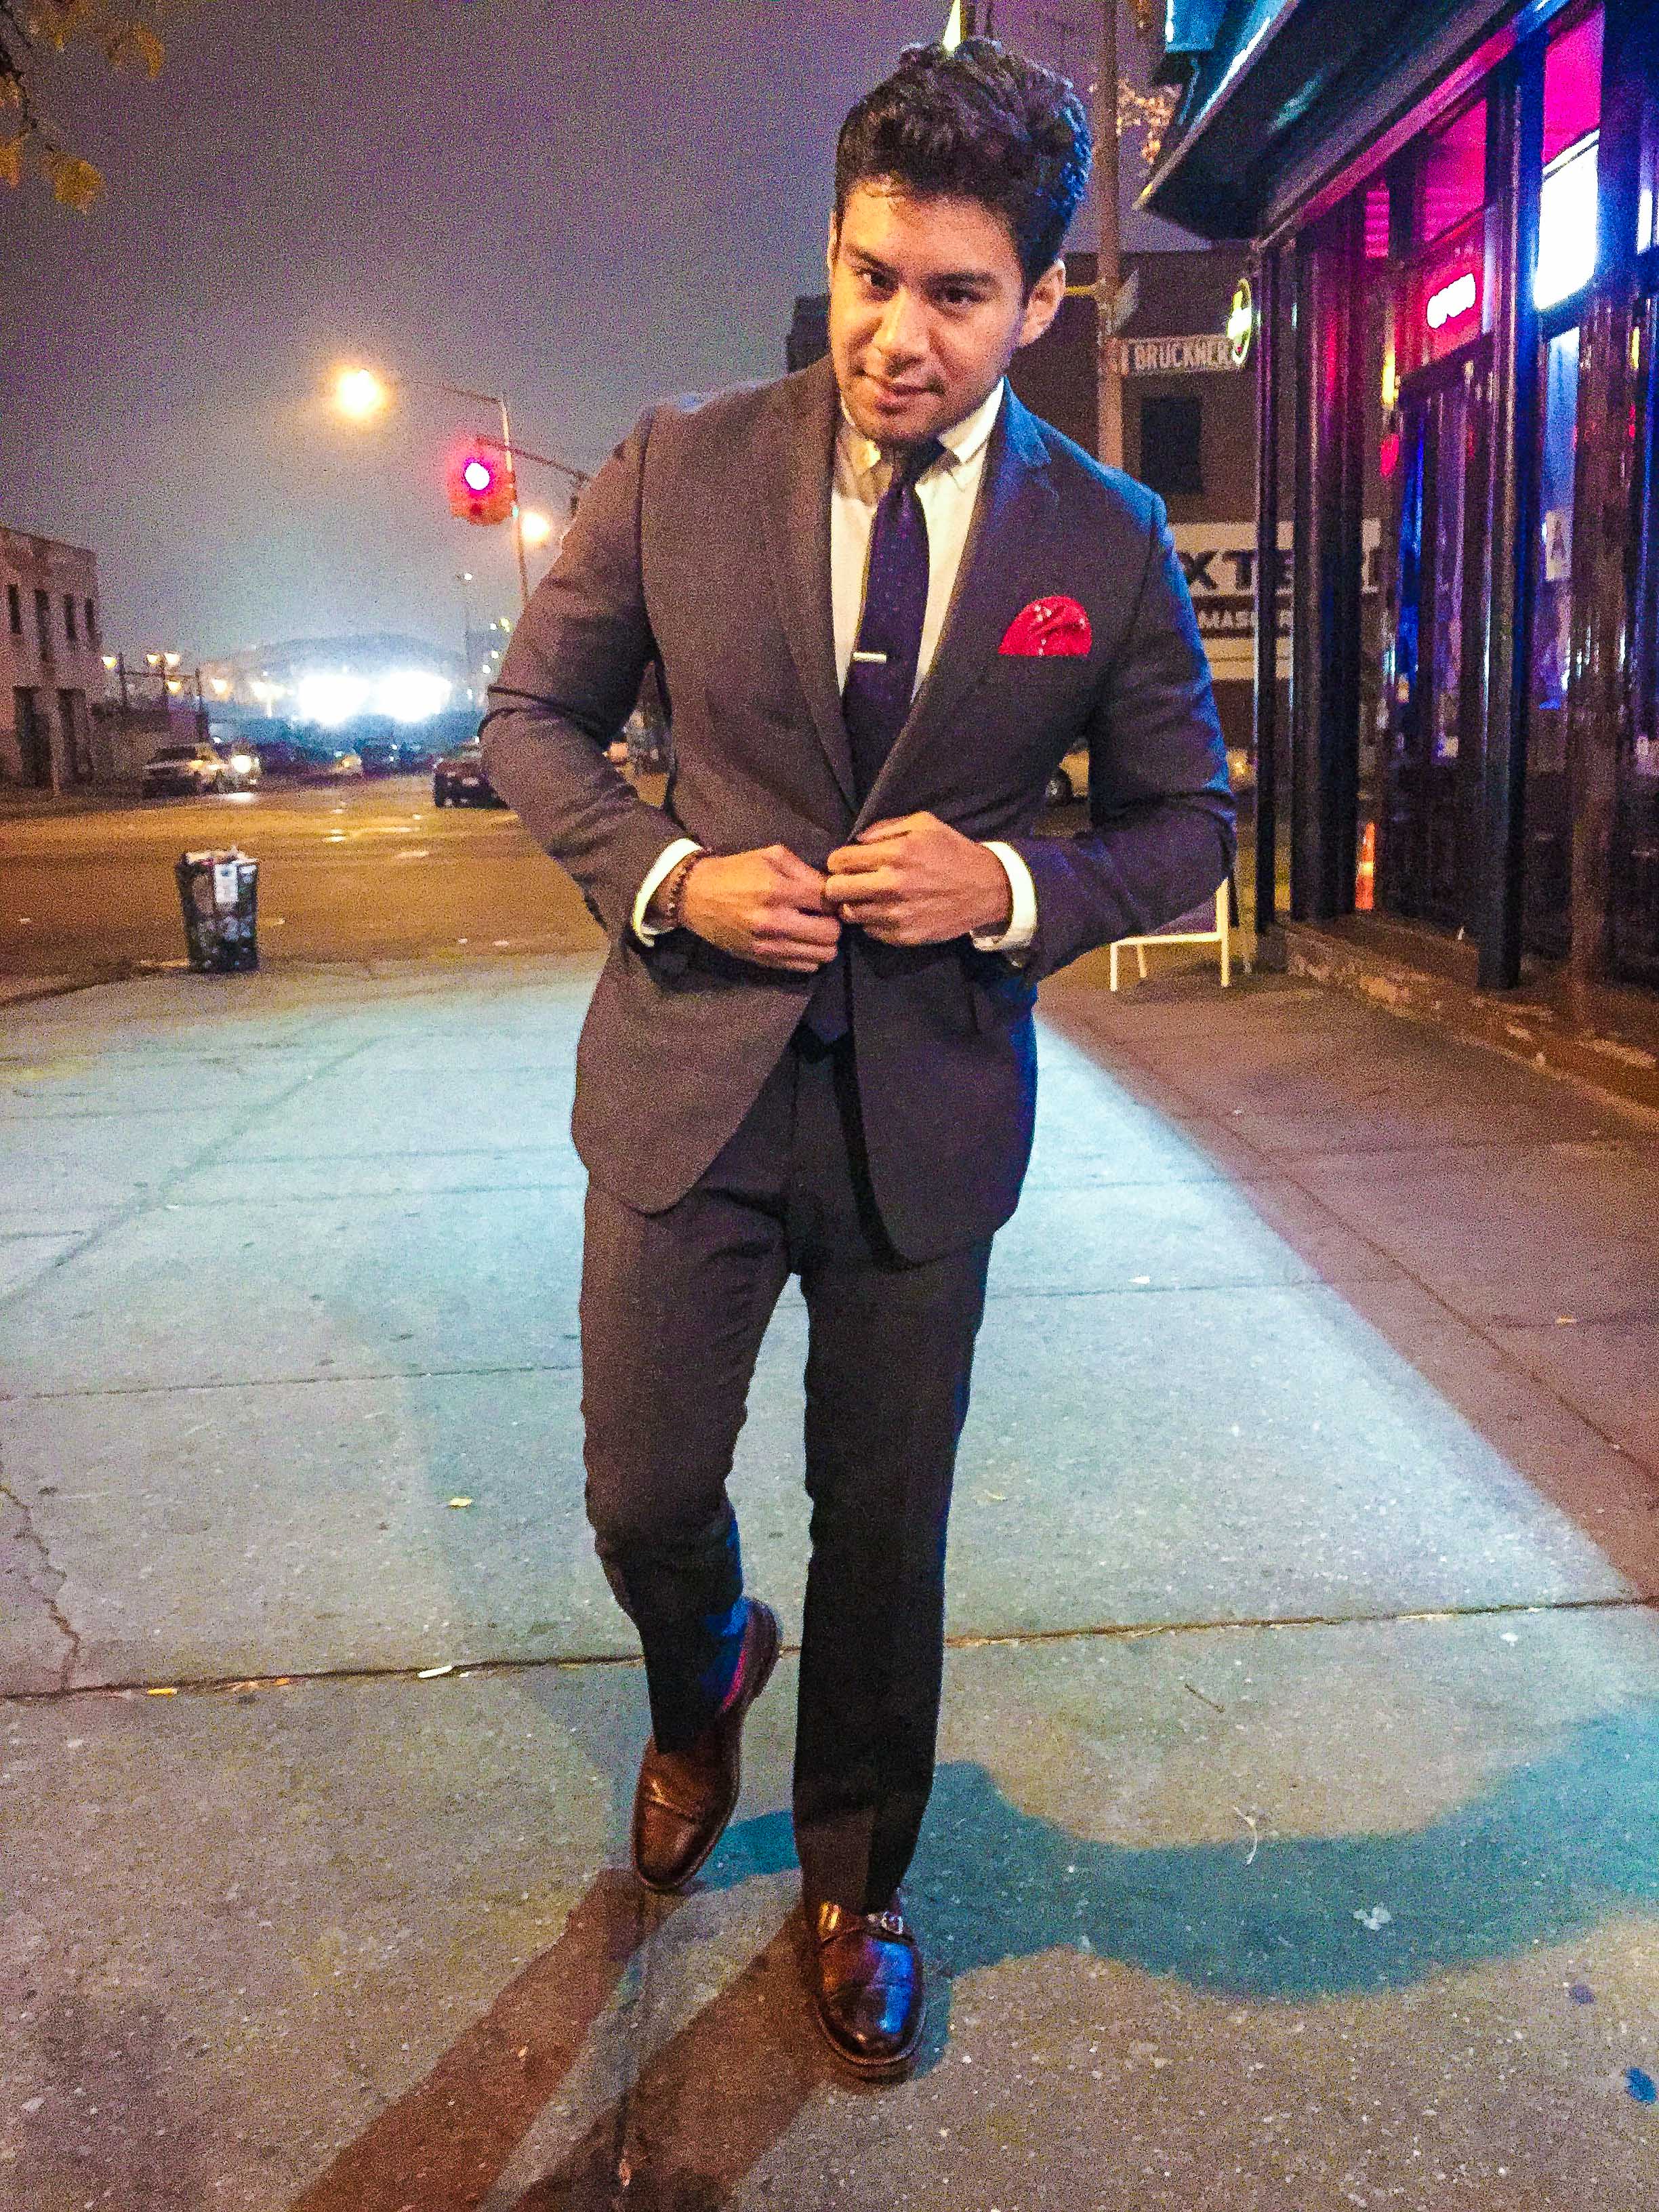 wearing a grey suit with red socks, red pocket square, brown shoes